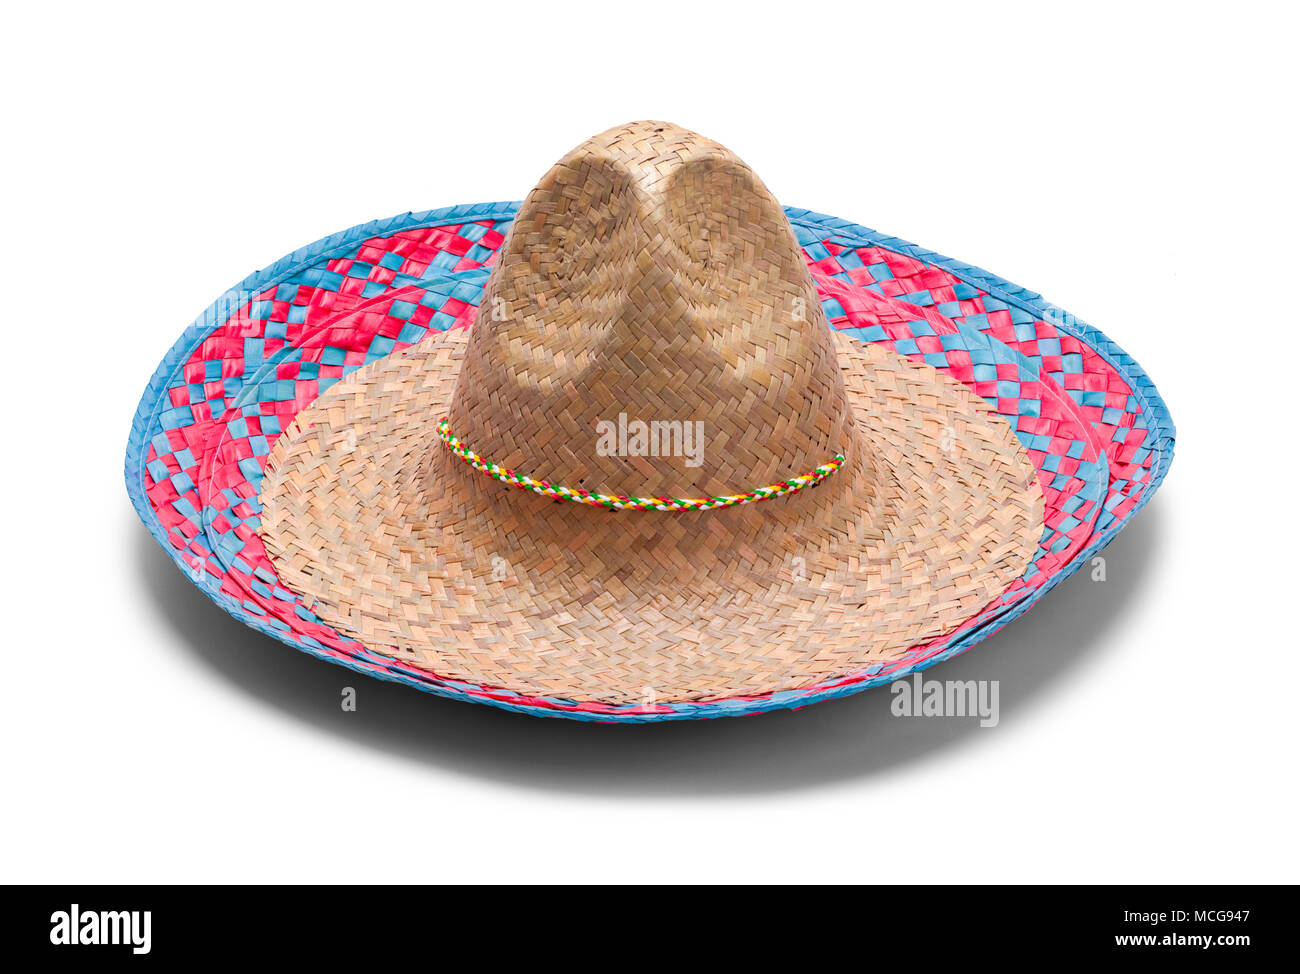 Grass Woven Sombrero Hat Isolated on White Background. Stock Photo